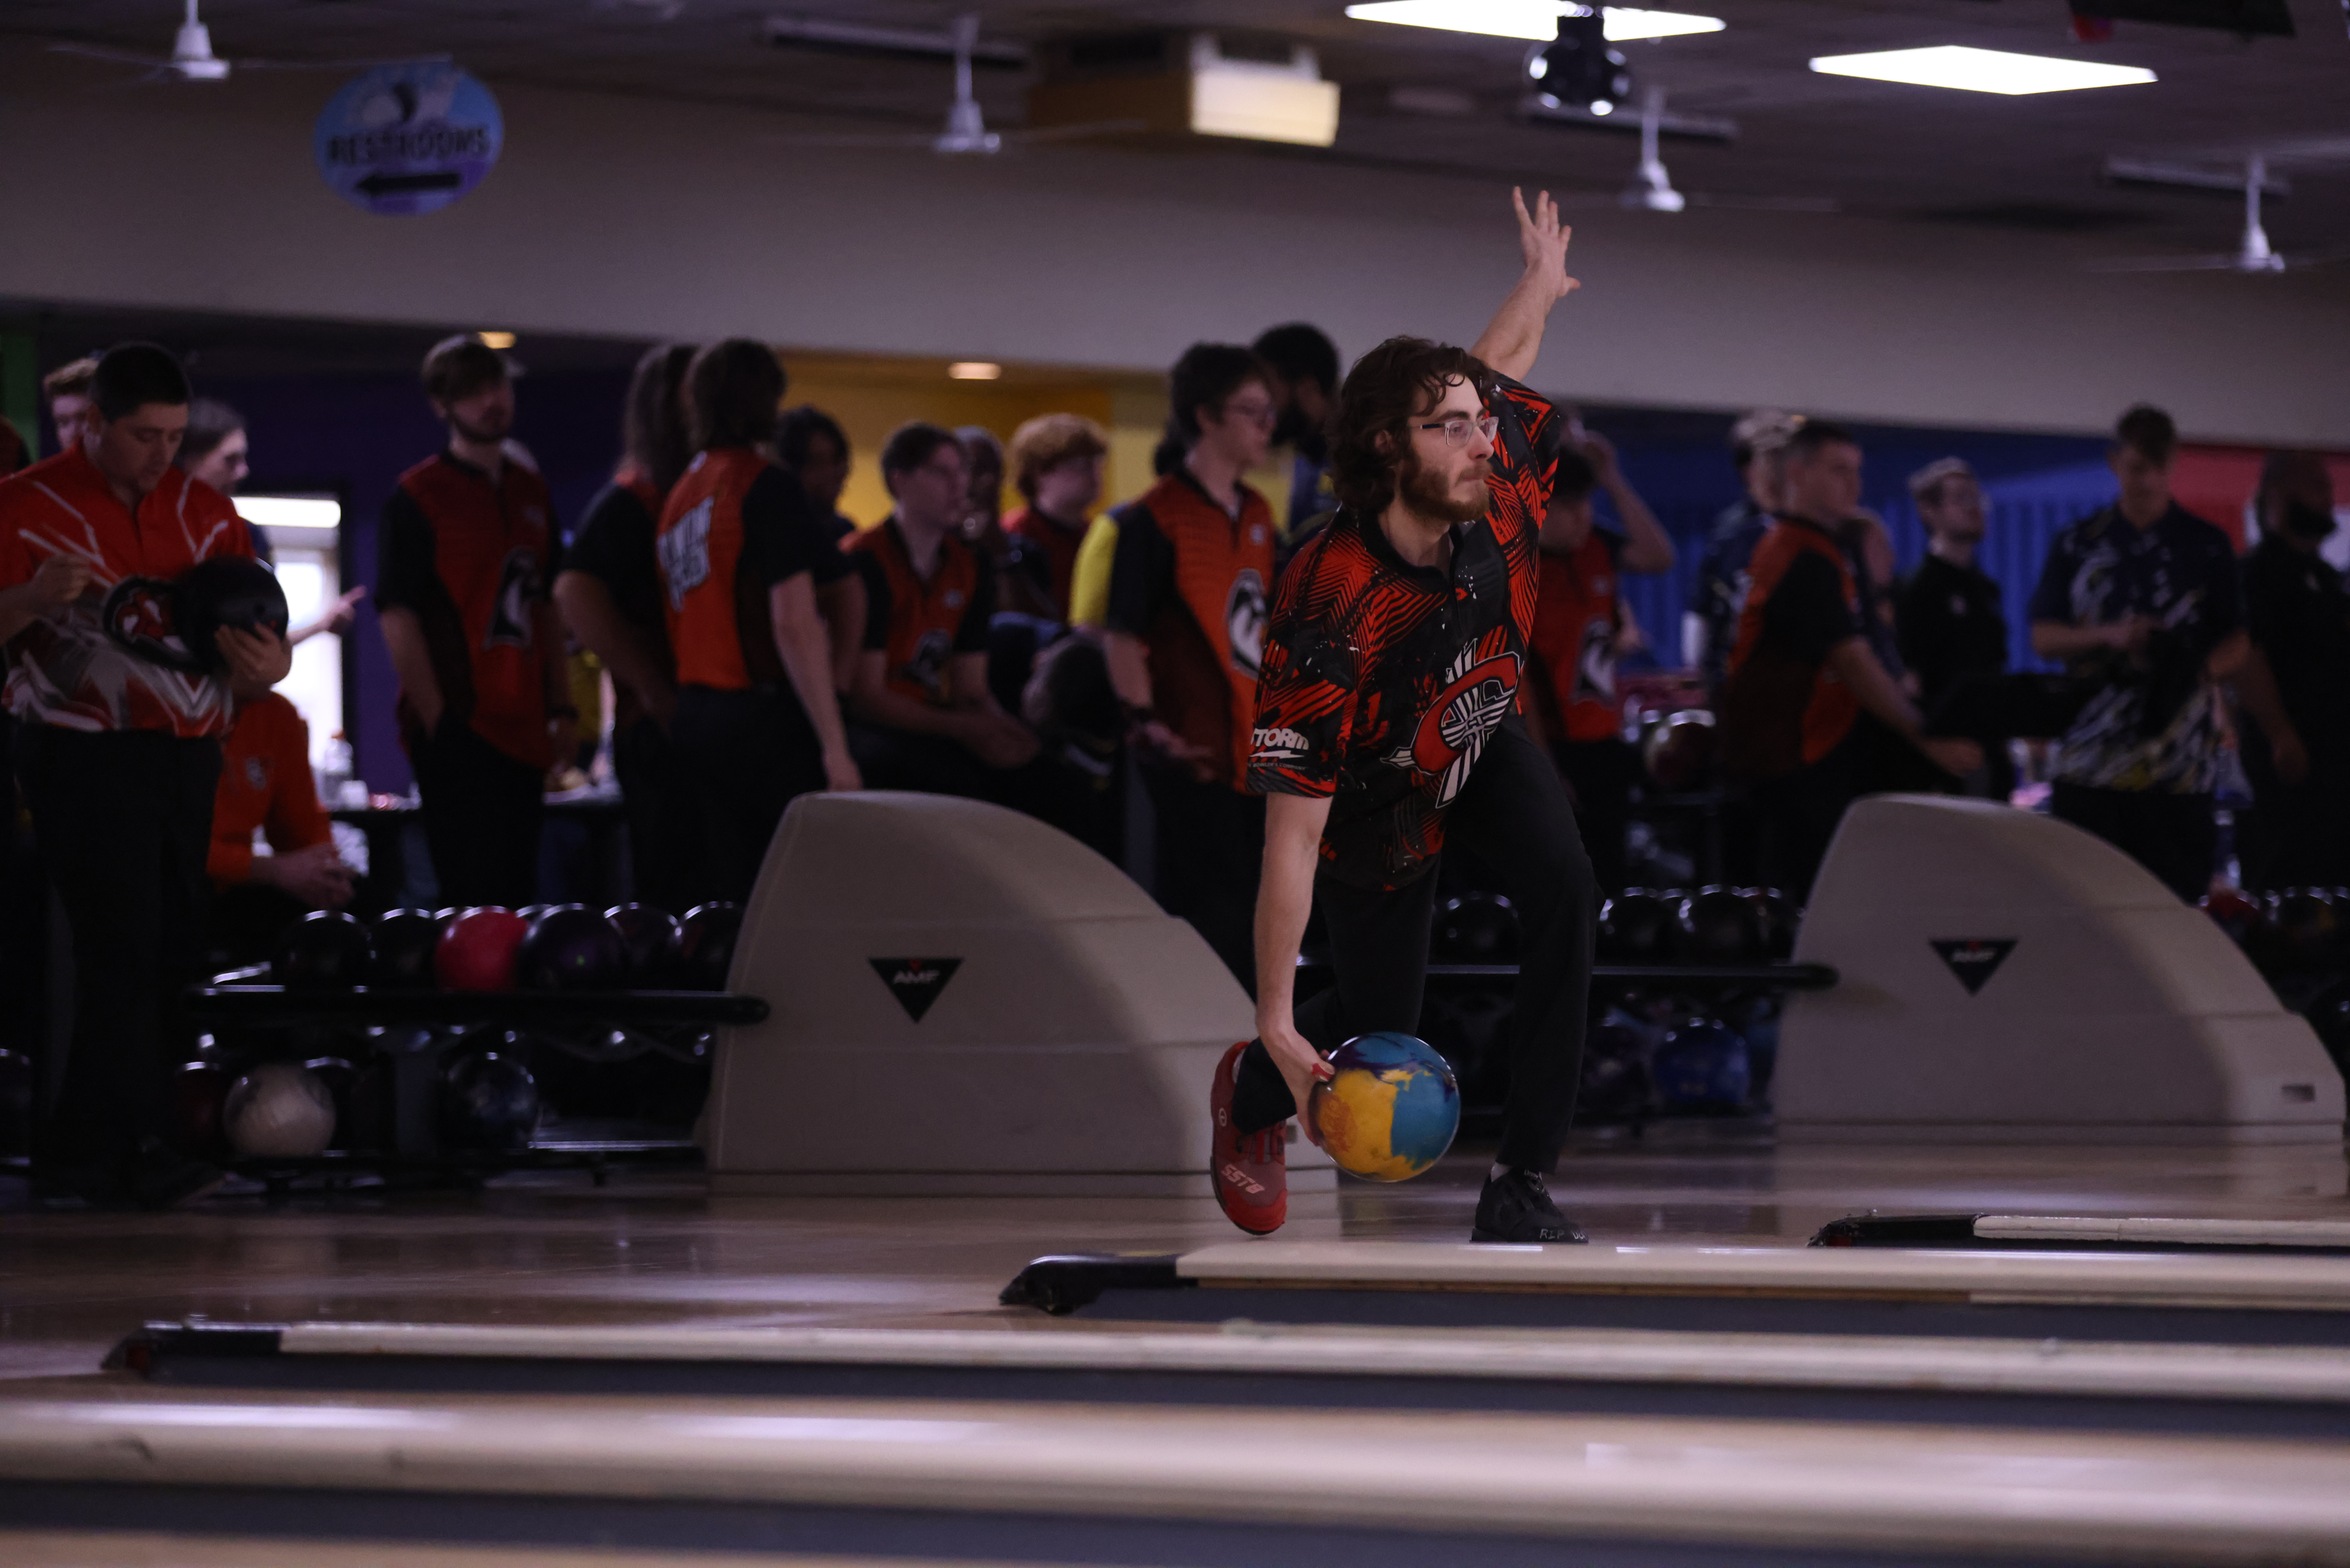 Men's Bowling completes play at the Hoosier Classic